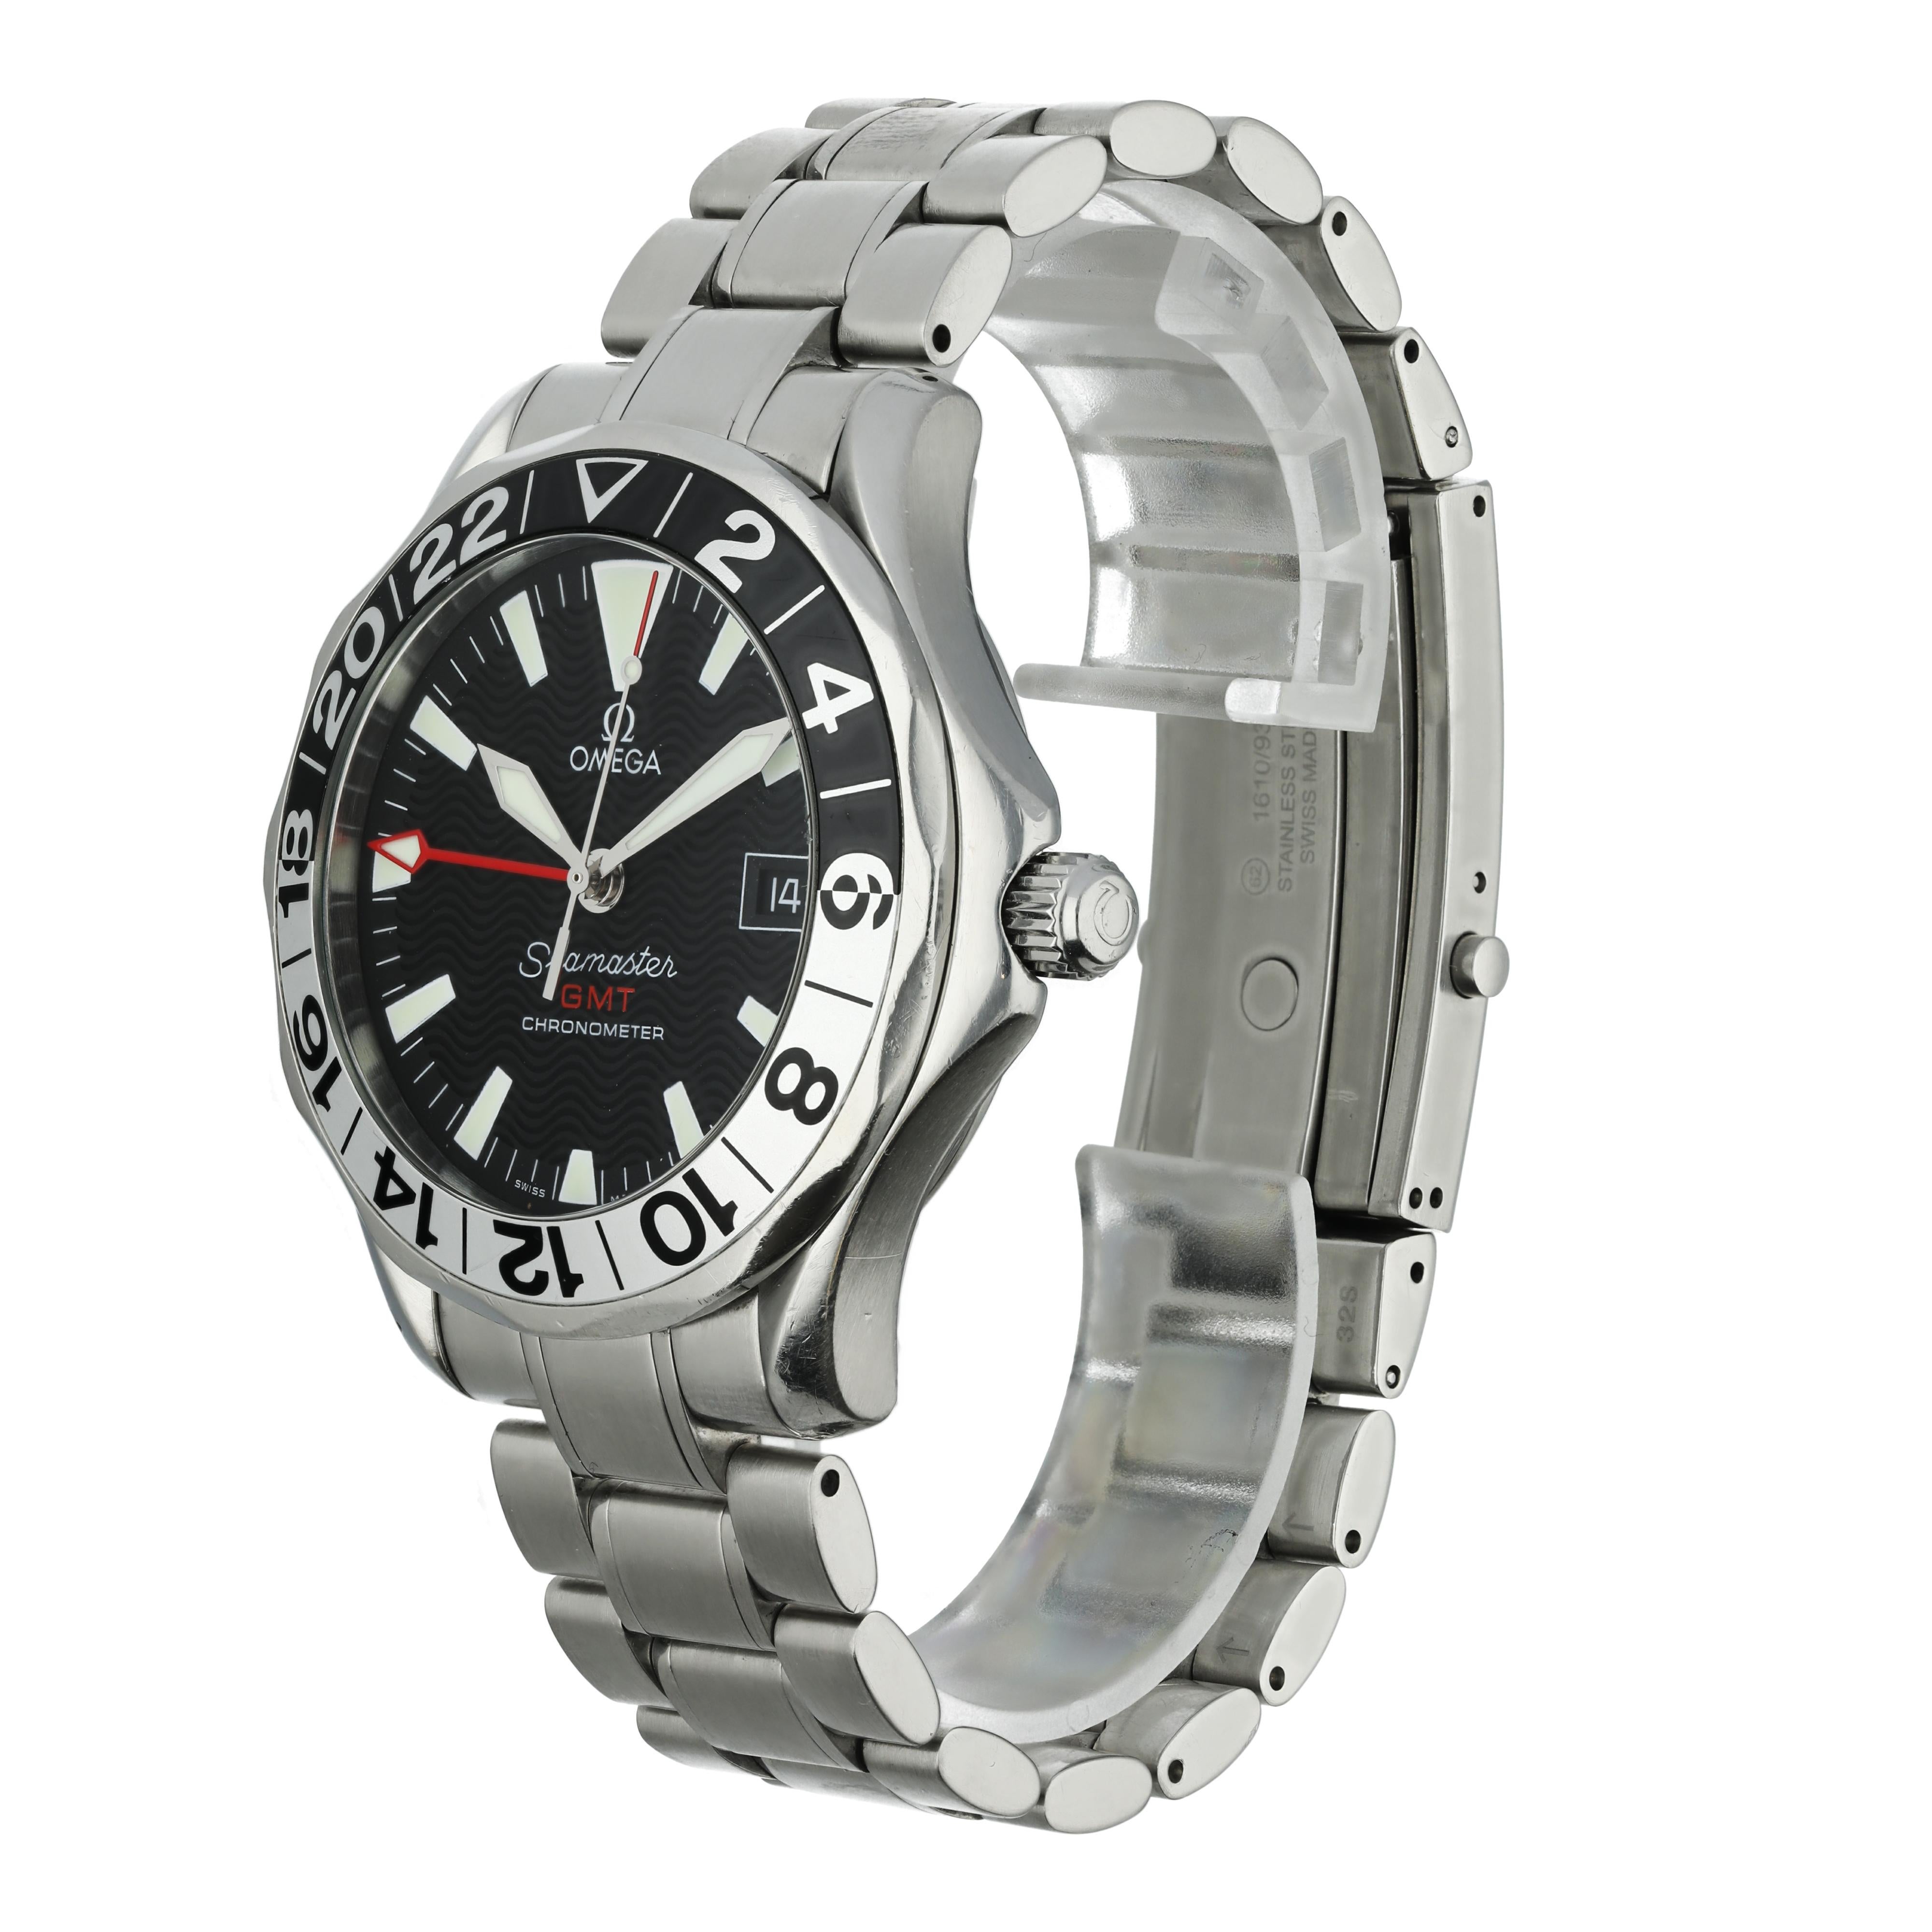 Omega Seamaster GMT 2534.50.00 50th Anniversary Edition Men's Watch.
41mm Stainless Steel case. 
Stainless Steel Stationary bezel. 
Black dial with Luminous Steel hands and index hour markers. 
Minute markers on the outer dial. 
Date display at the